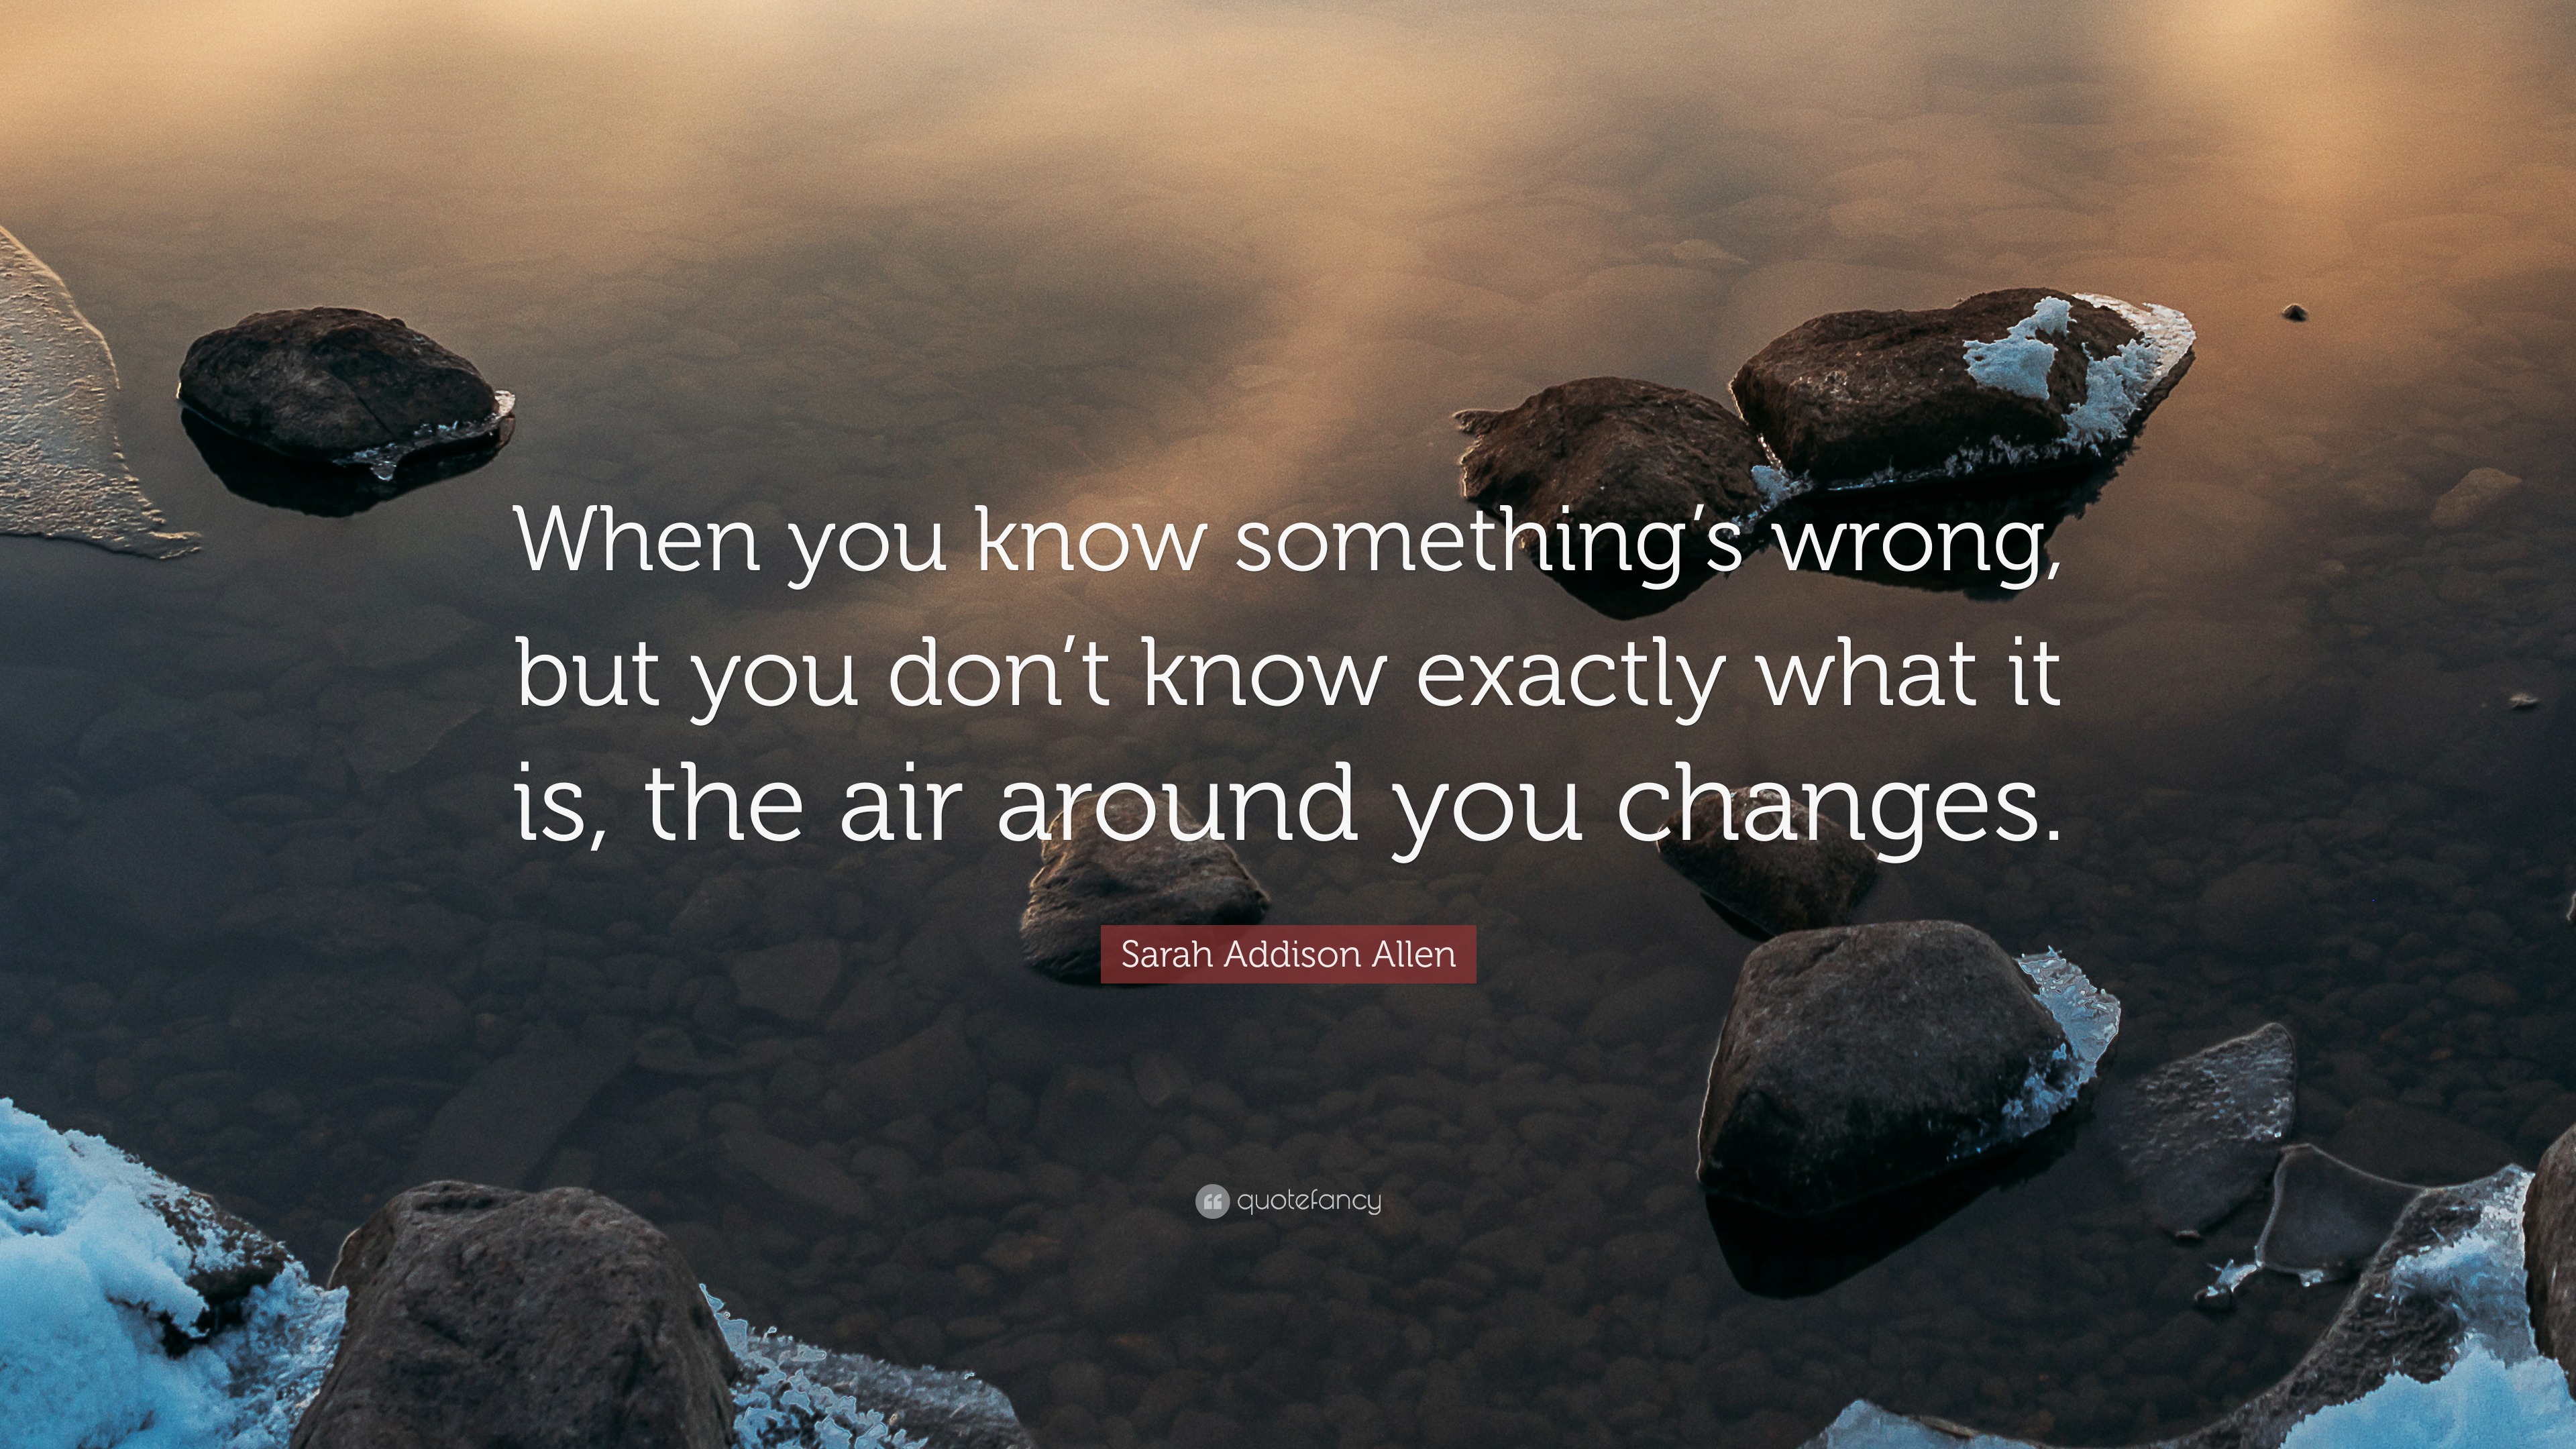 Sarah Addison Allen Quote: “When You Know Something's Wrong, But You Don't Know Exactly What